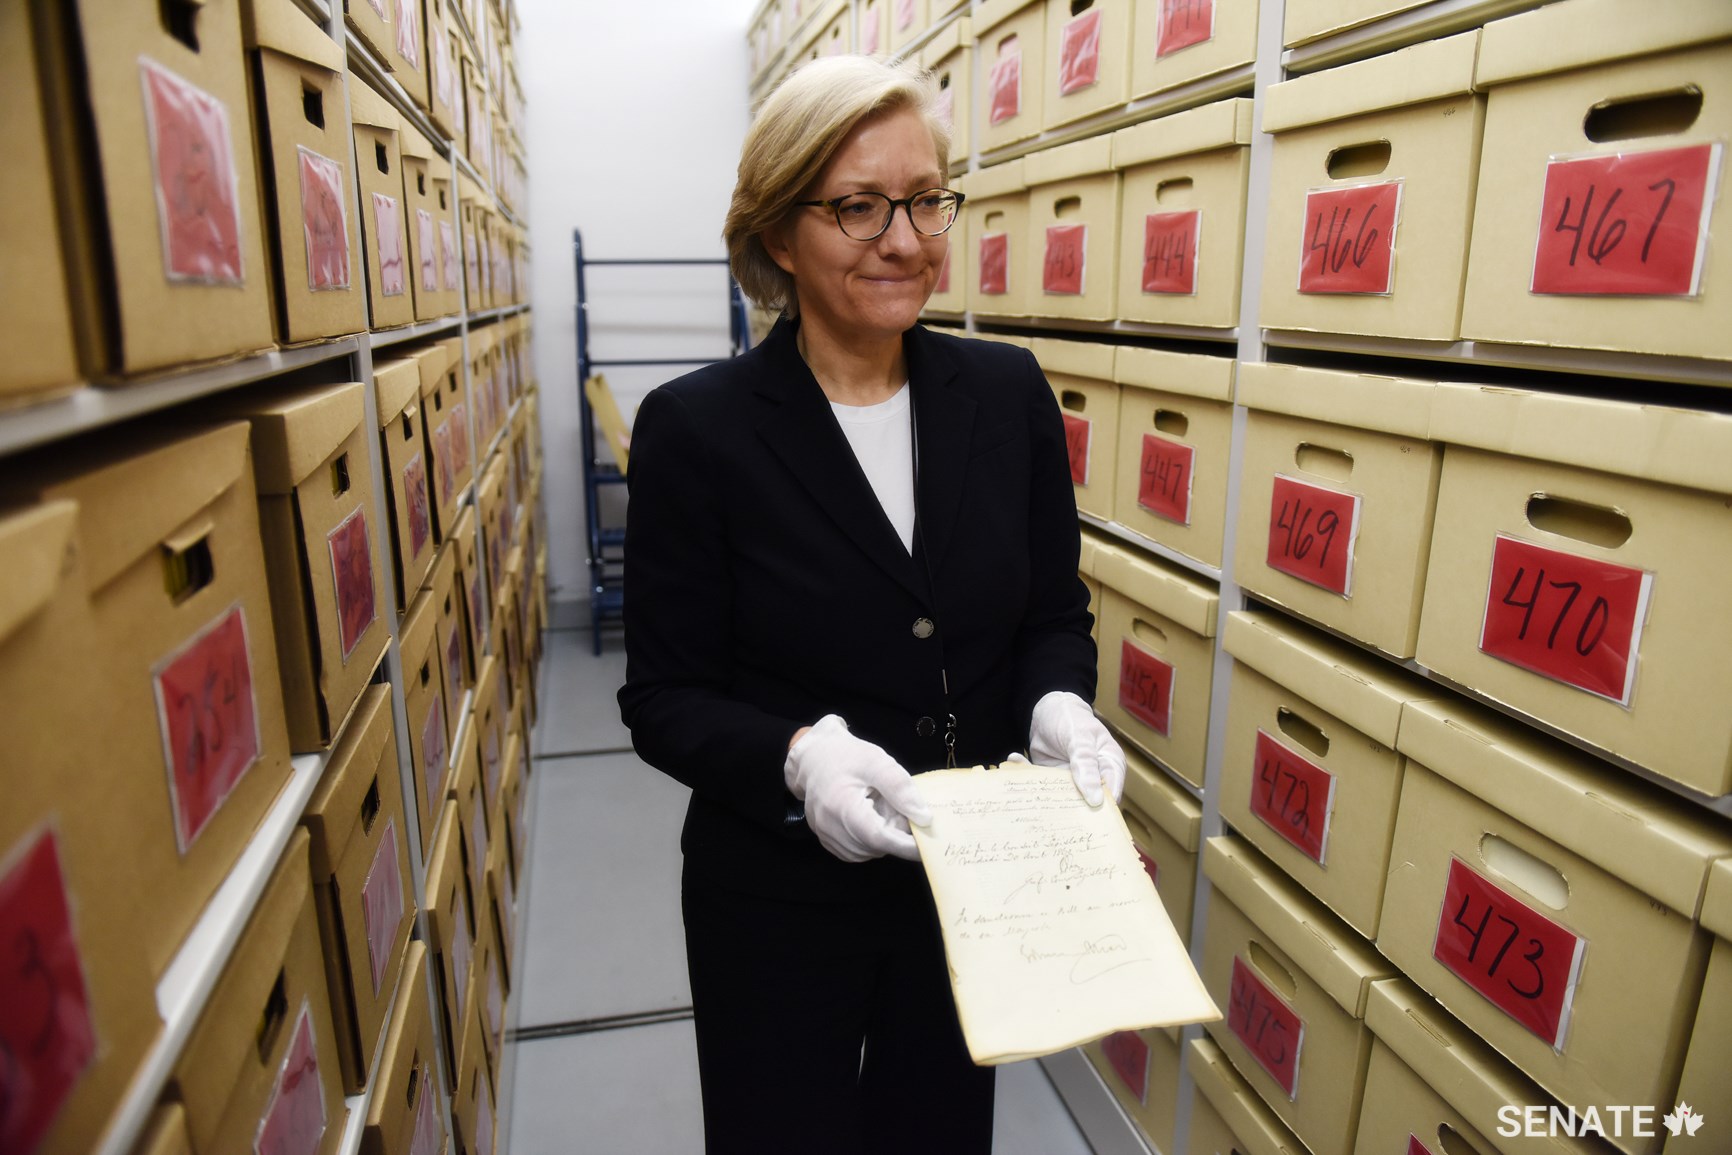 The Senate’s archivist and chief of information management, France Bélisle, is responsible for the Senate archives, a collection of historic documents she calls “the most important legal series of archives that exist in Canada.”